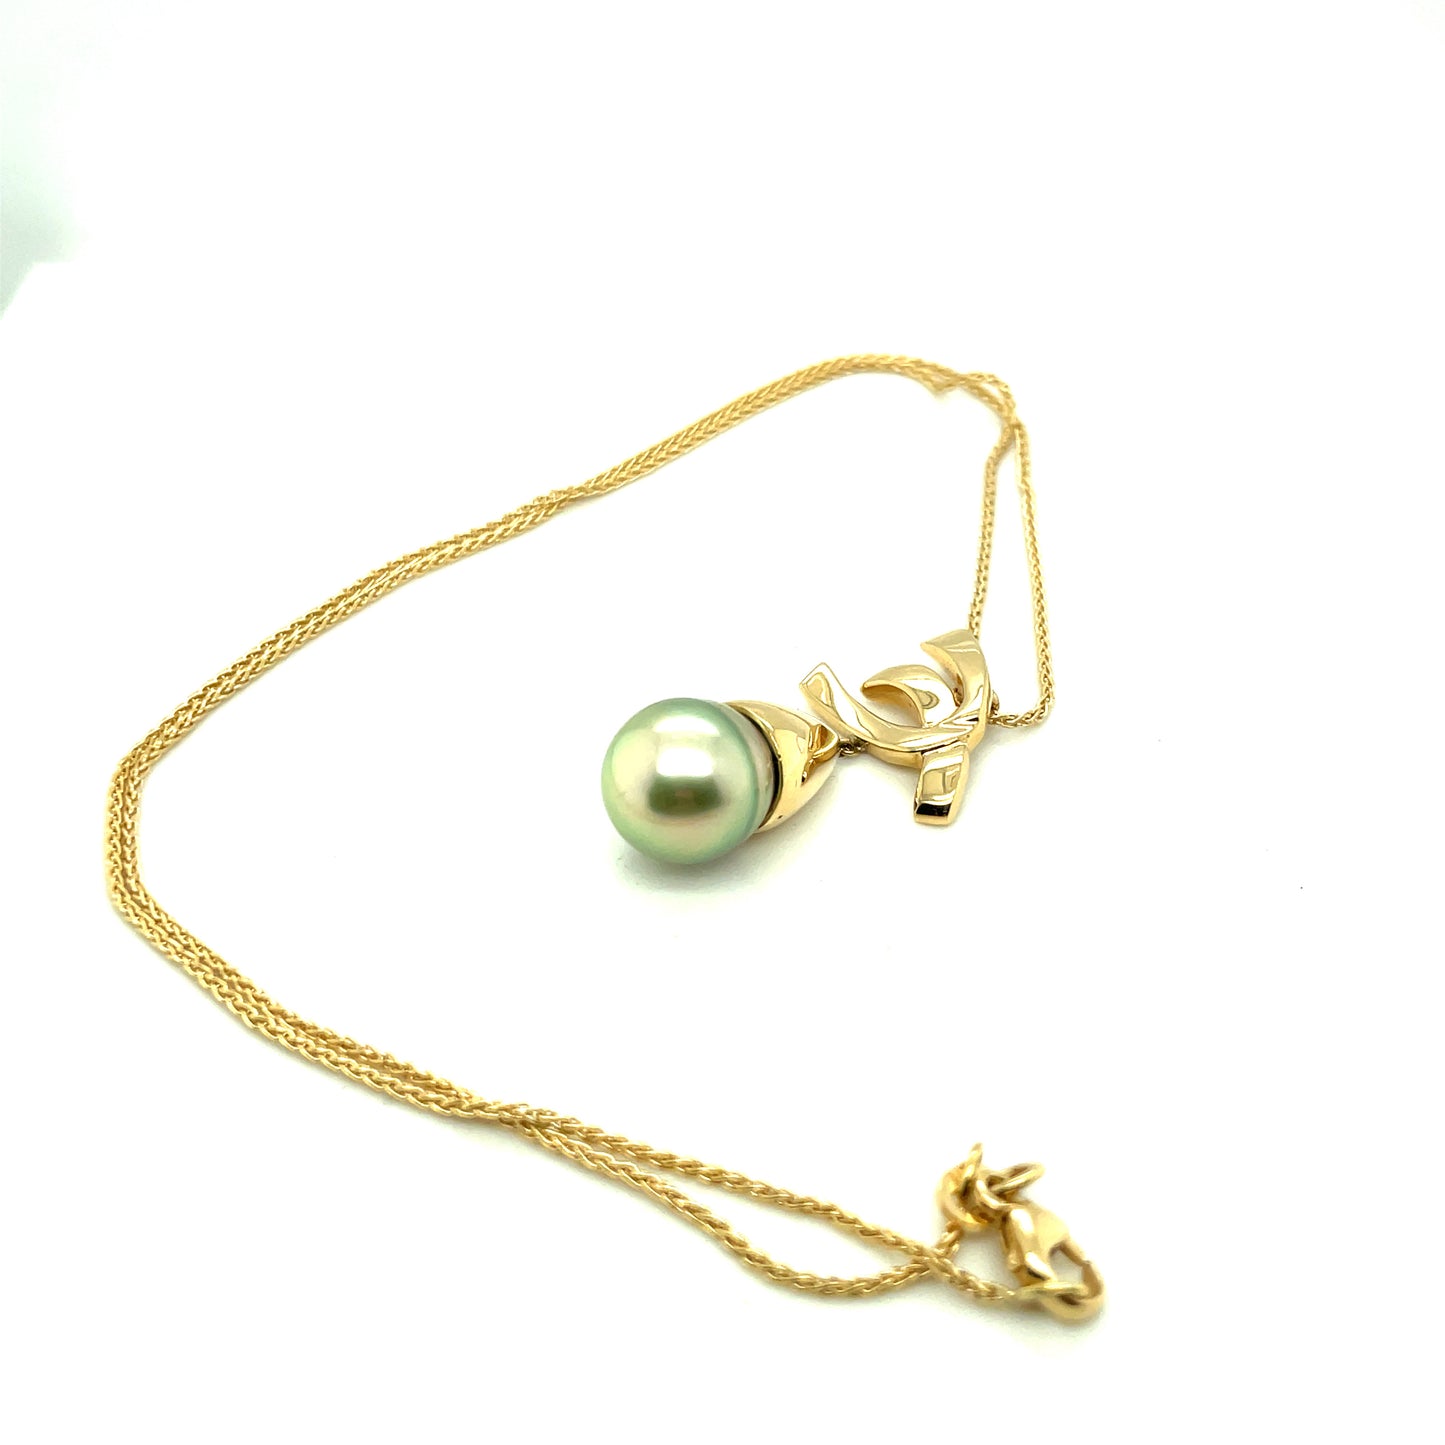 Vintage 18k Yellow Gold and Pearl Necklace 11.6 grams